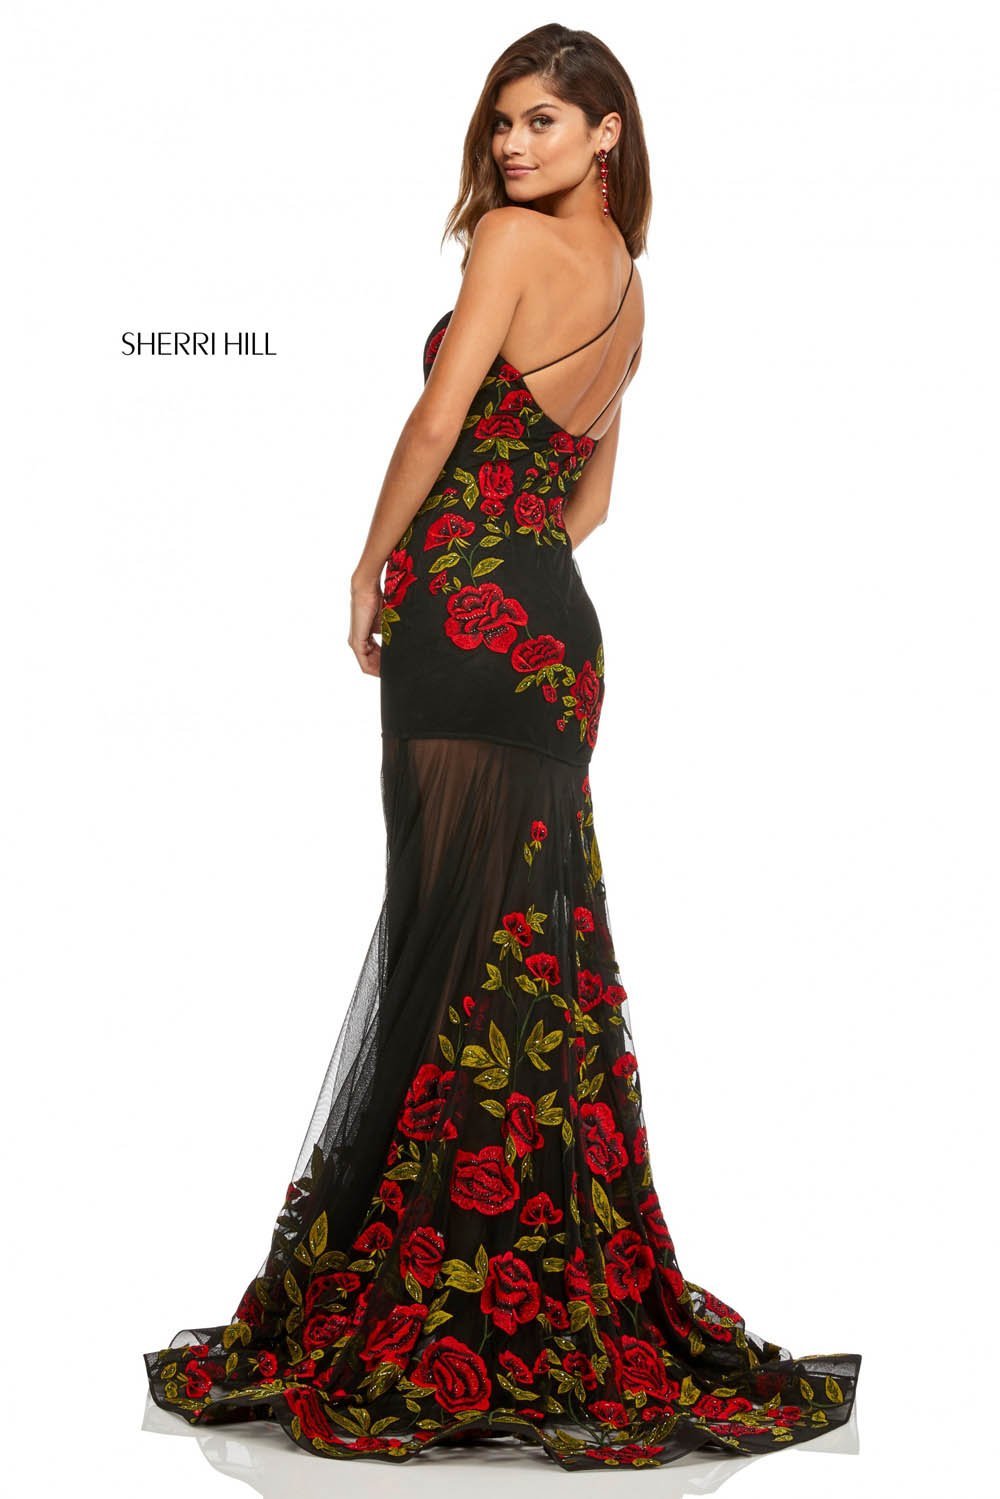 Sherri Hill 52761 dress images in these colors: Black Red.